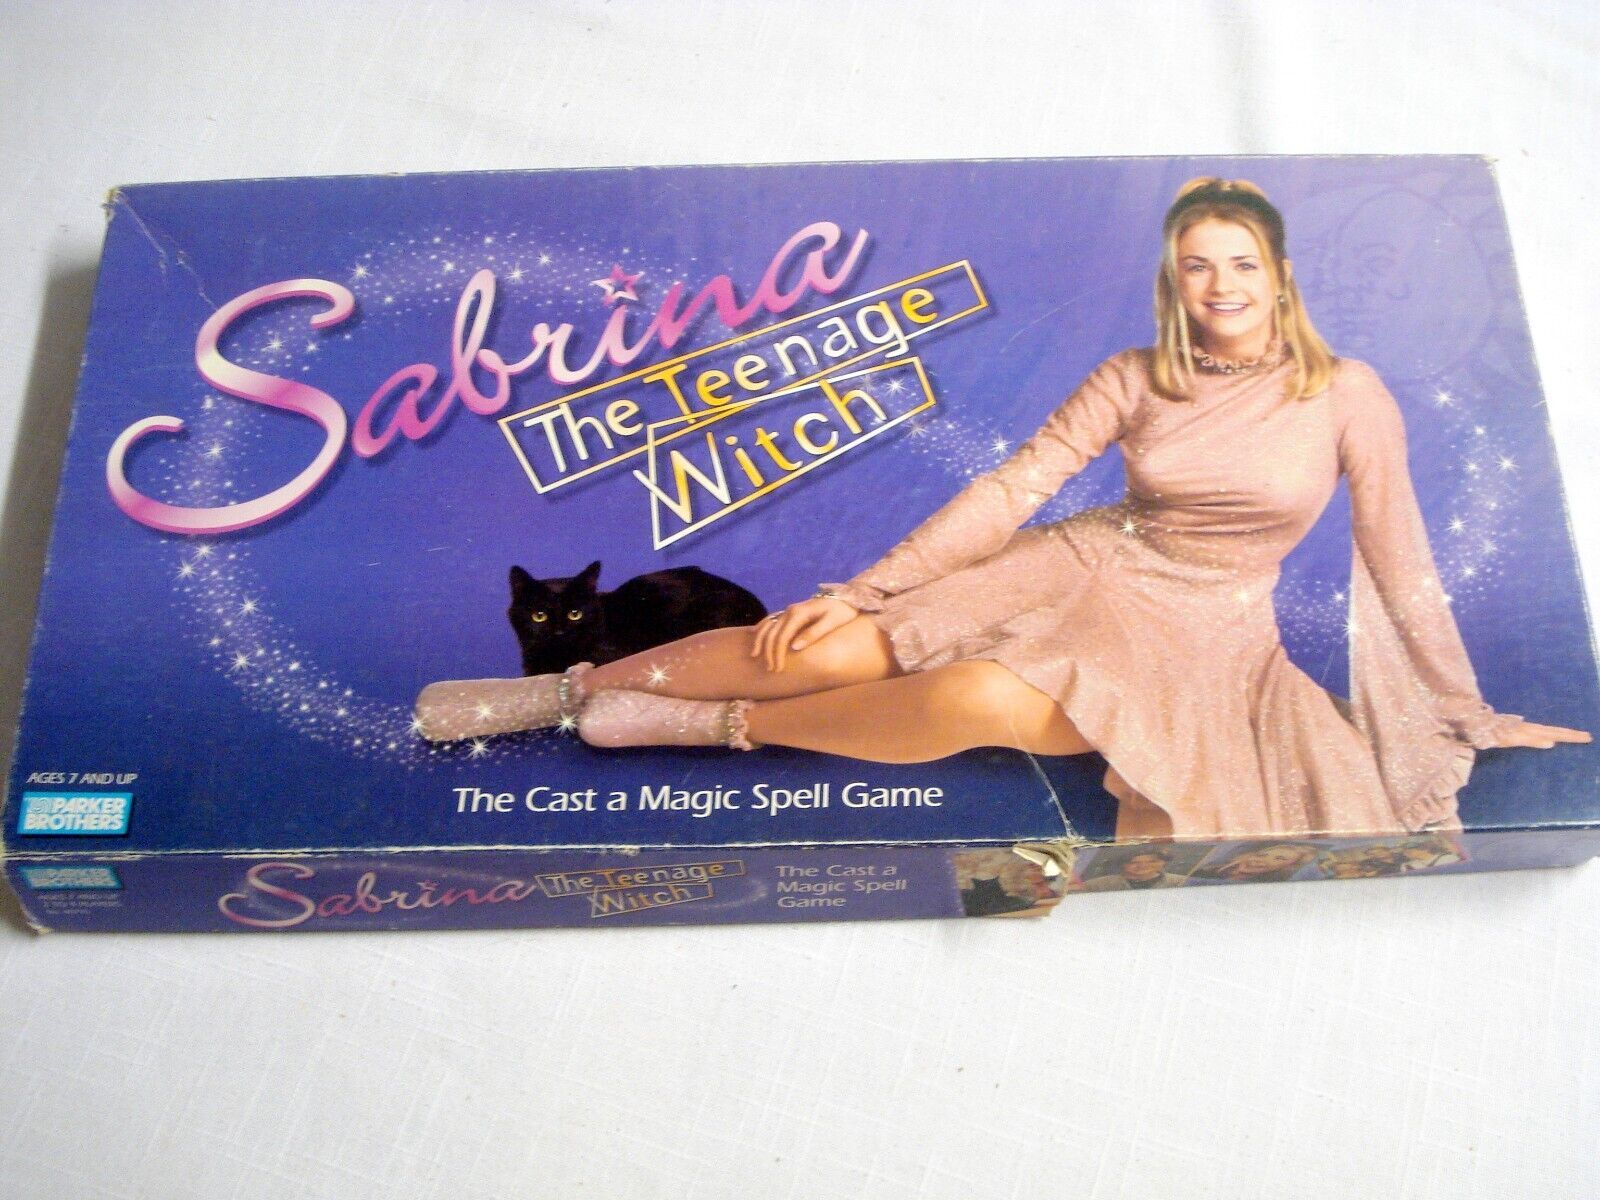 Primary image for Sabrina the Teenage Witch TV Board Game 1997 Incomplete Parker Brothers